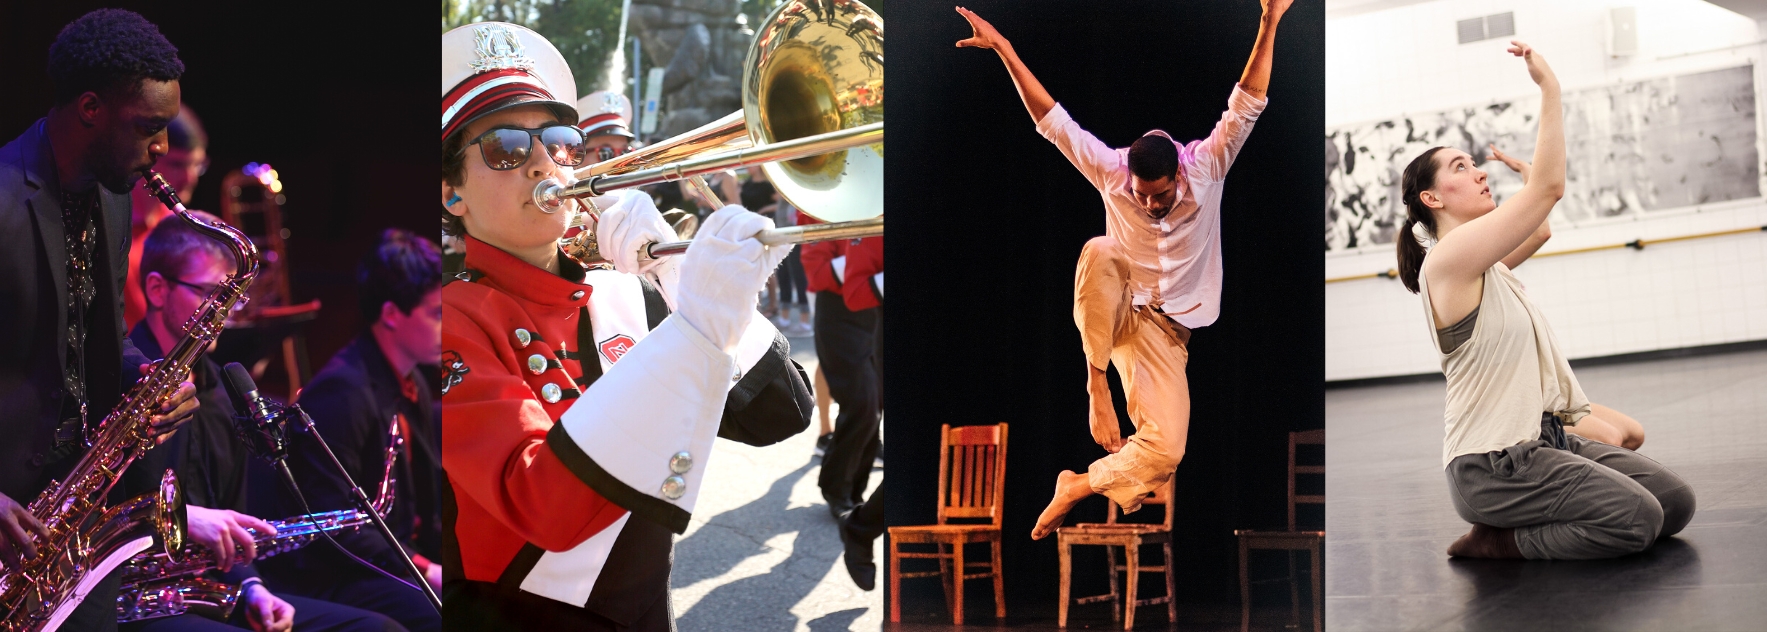 Collage featuring a saxophone player, a marching band performer, a dancer jumping on stage, and a dancer rehearsing in a studio